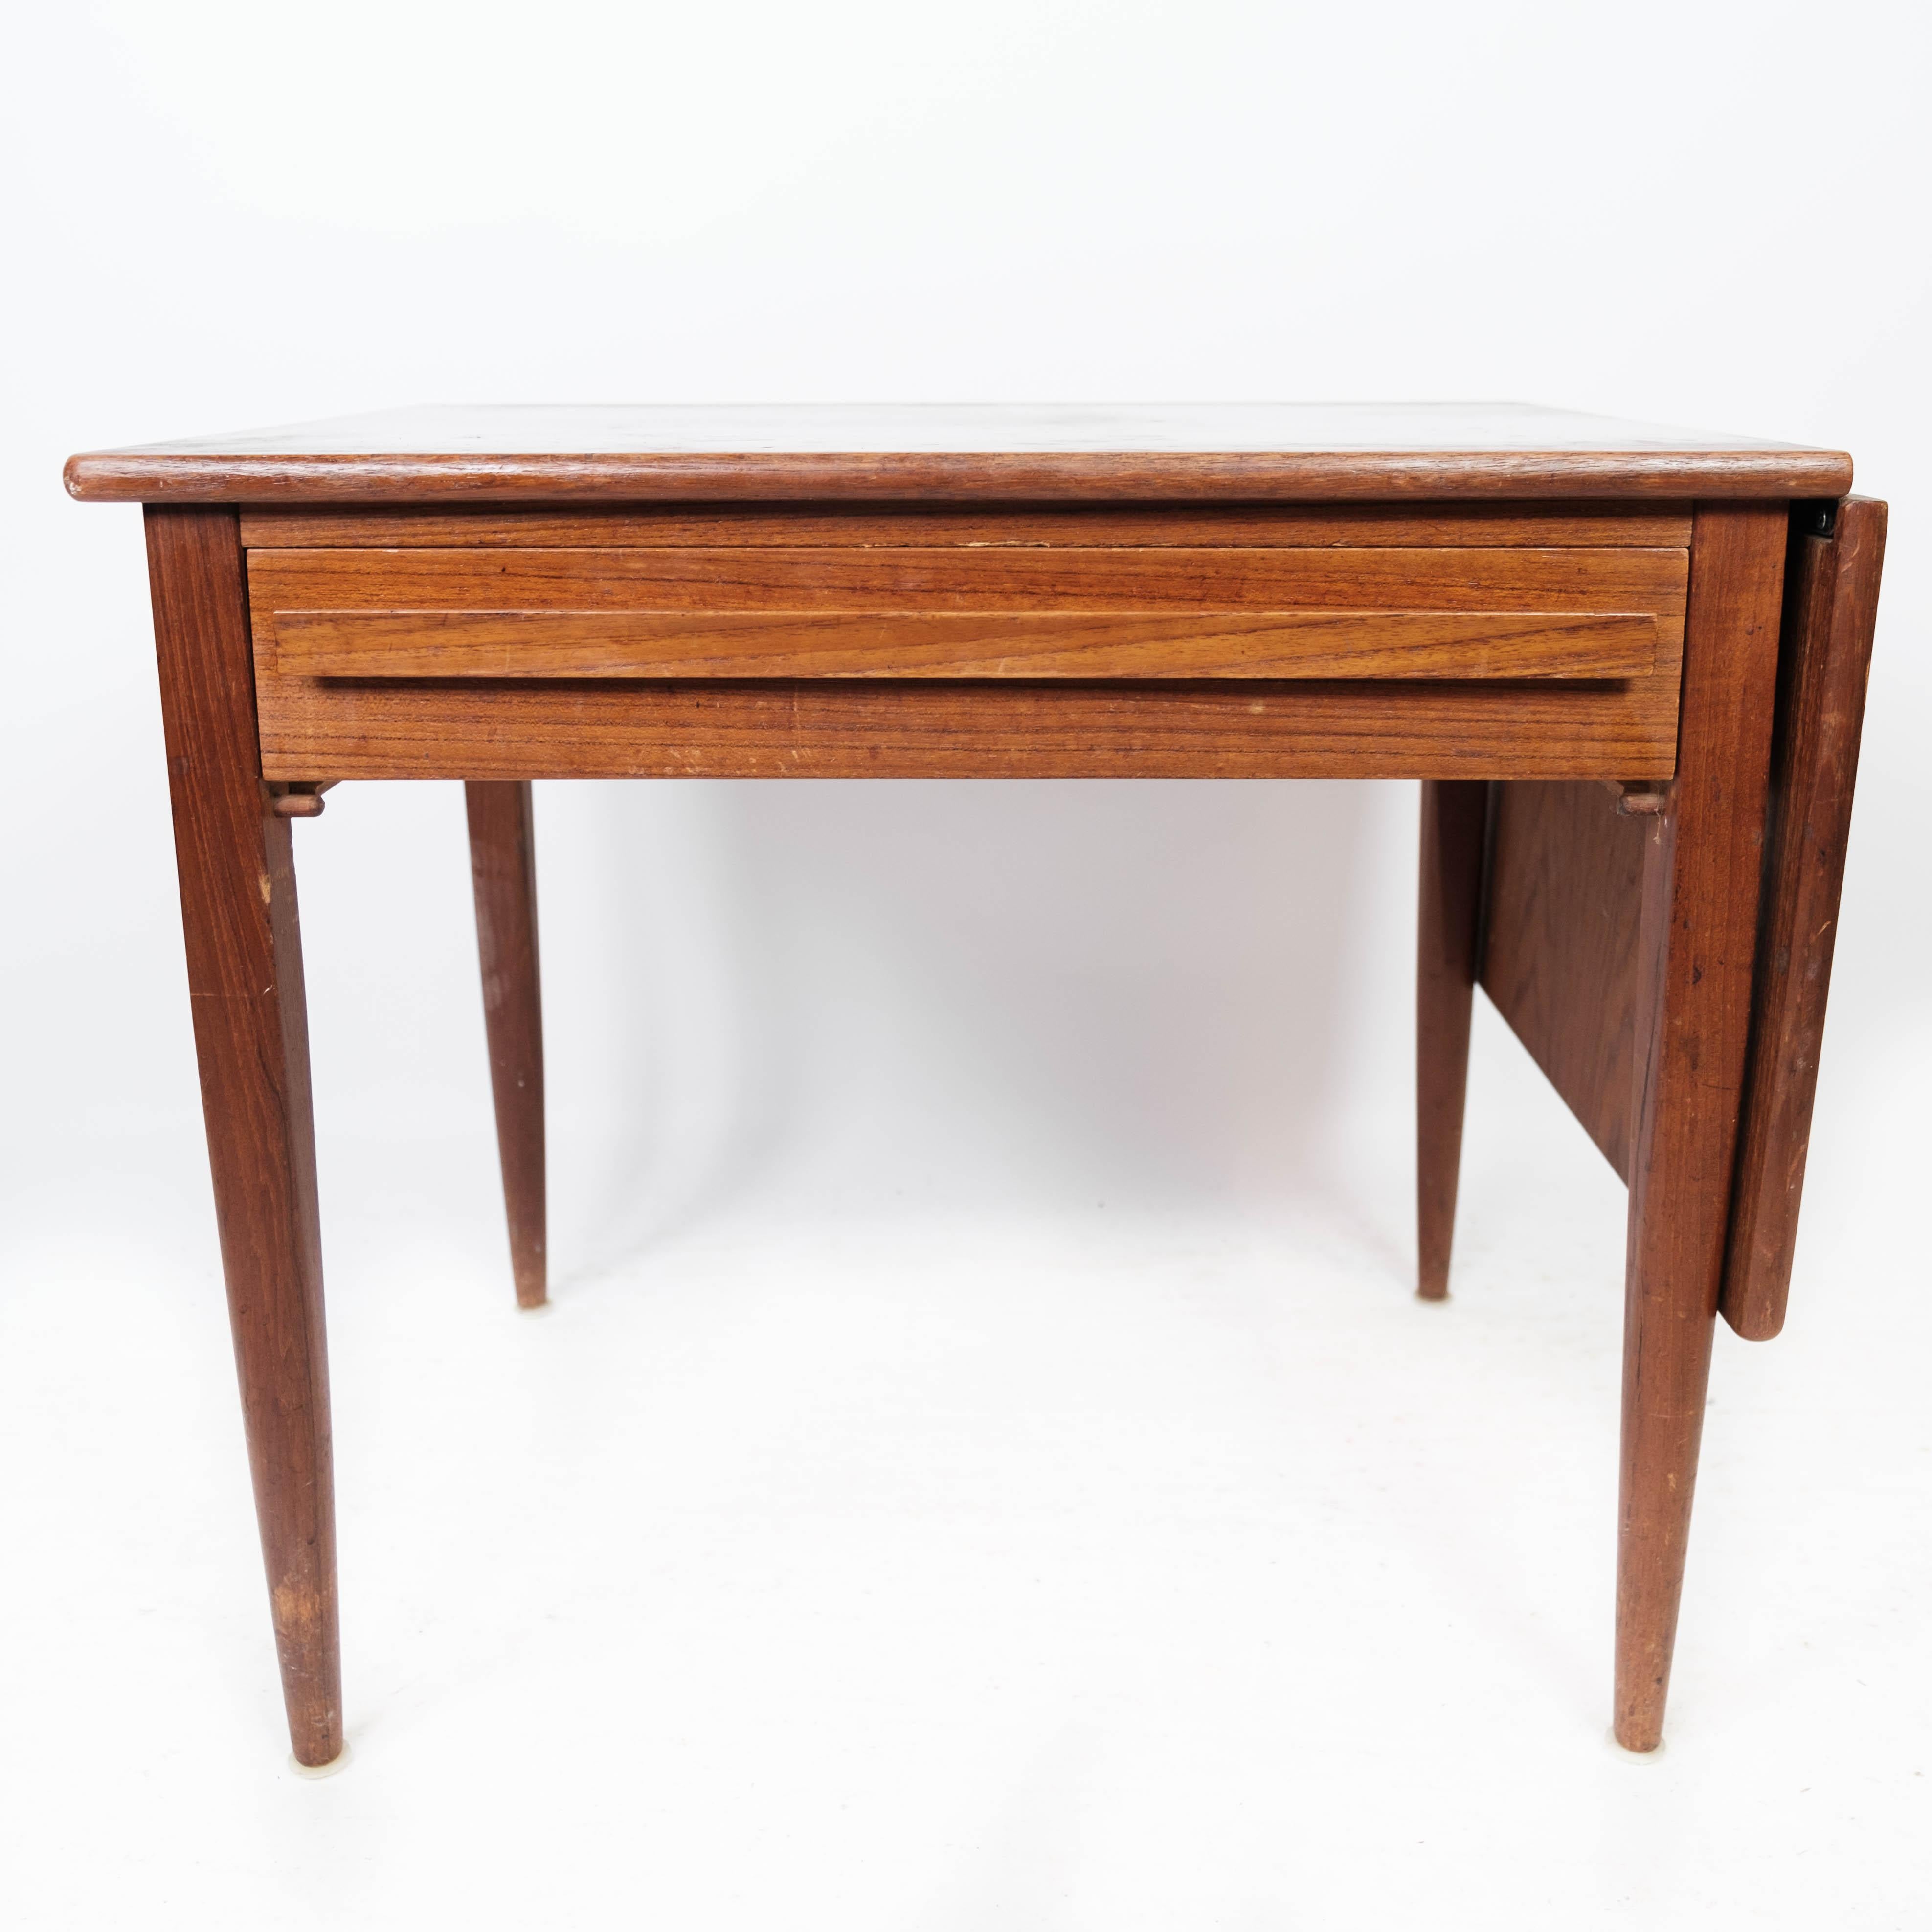 Mid-Century Modern Side Table Made In Teak, Danish Design Made By Silkeborg Furniture From 1960s For Sale